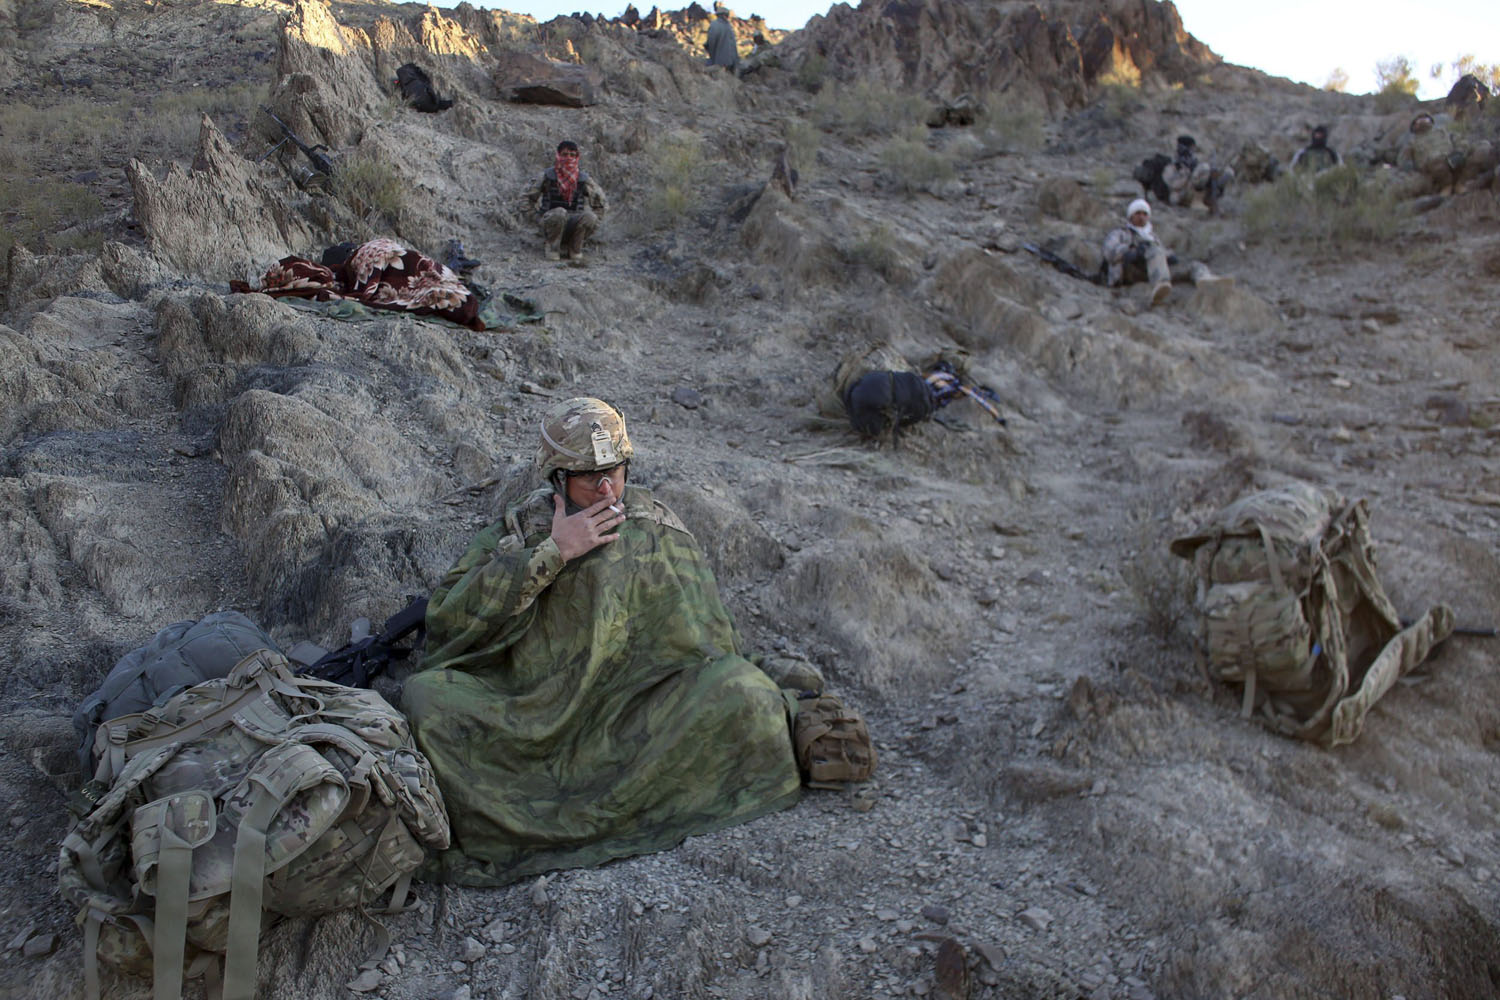 Image: Nov. 2, 2012. U.S. and Afghan soldiers rest during an operation on a cold morning near the town of Walli Was in Paktika province.